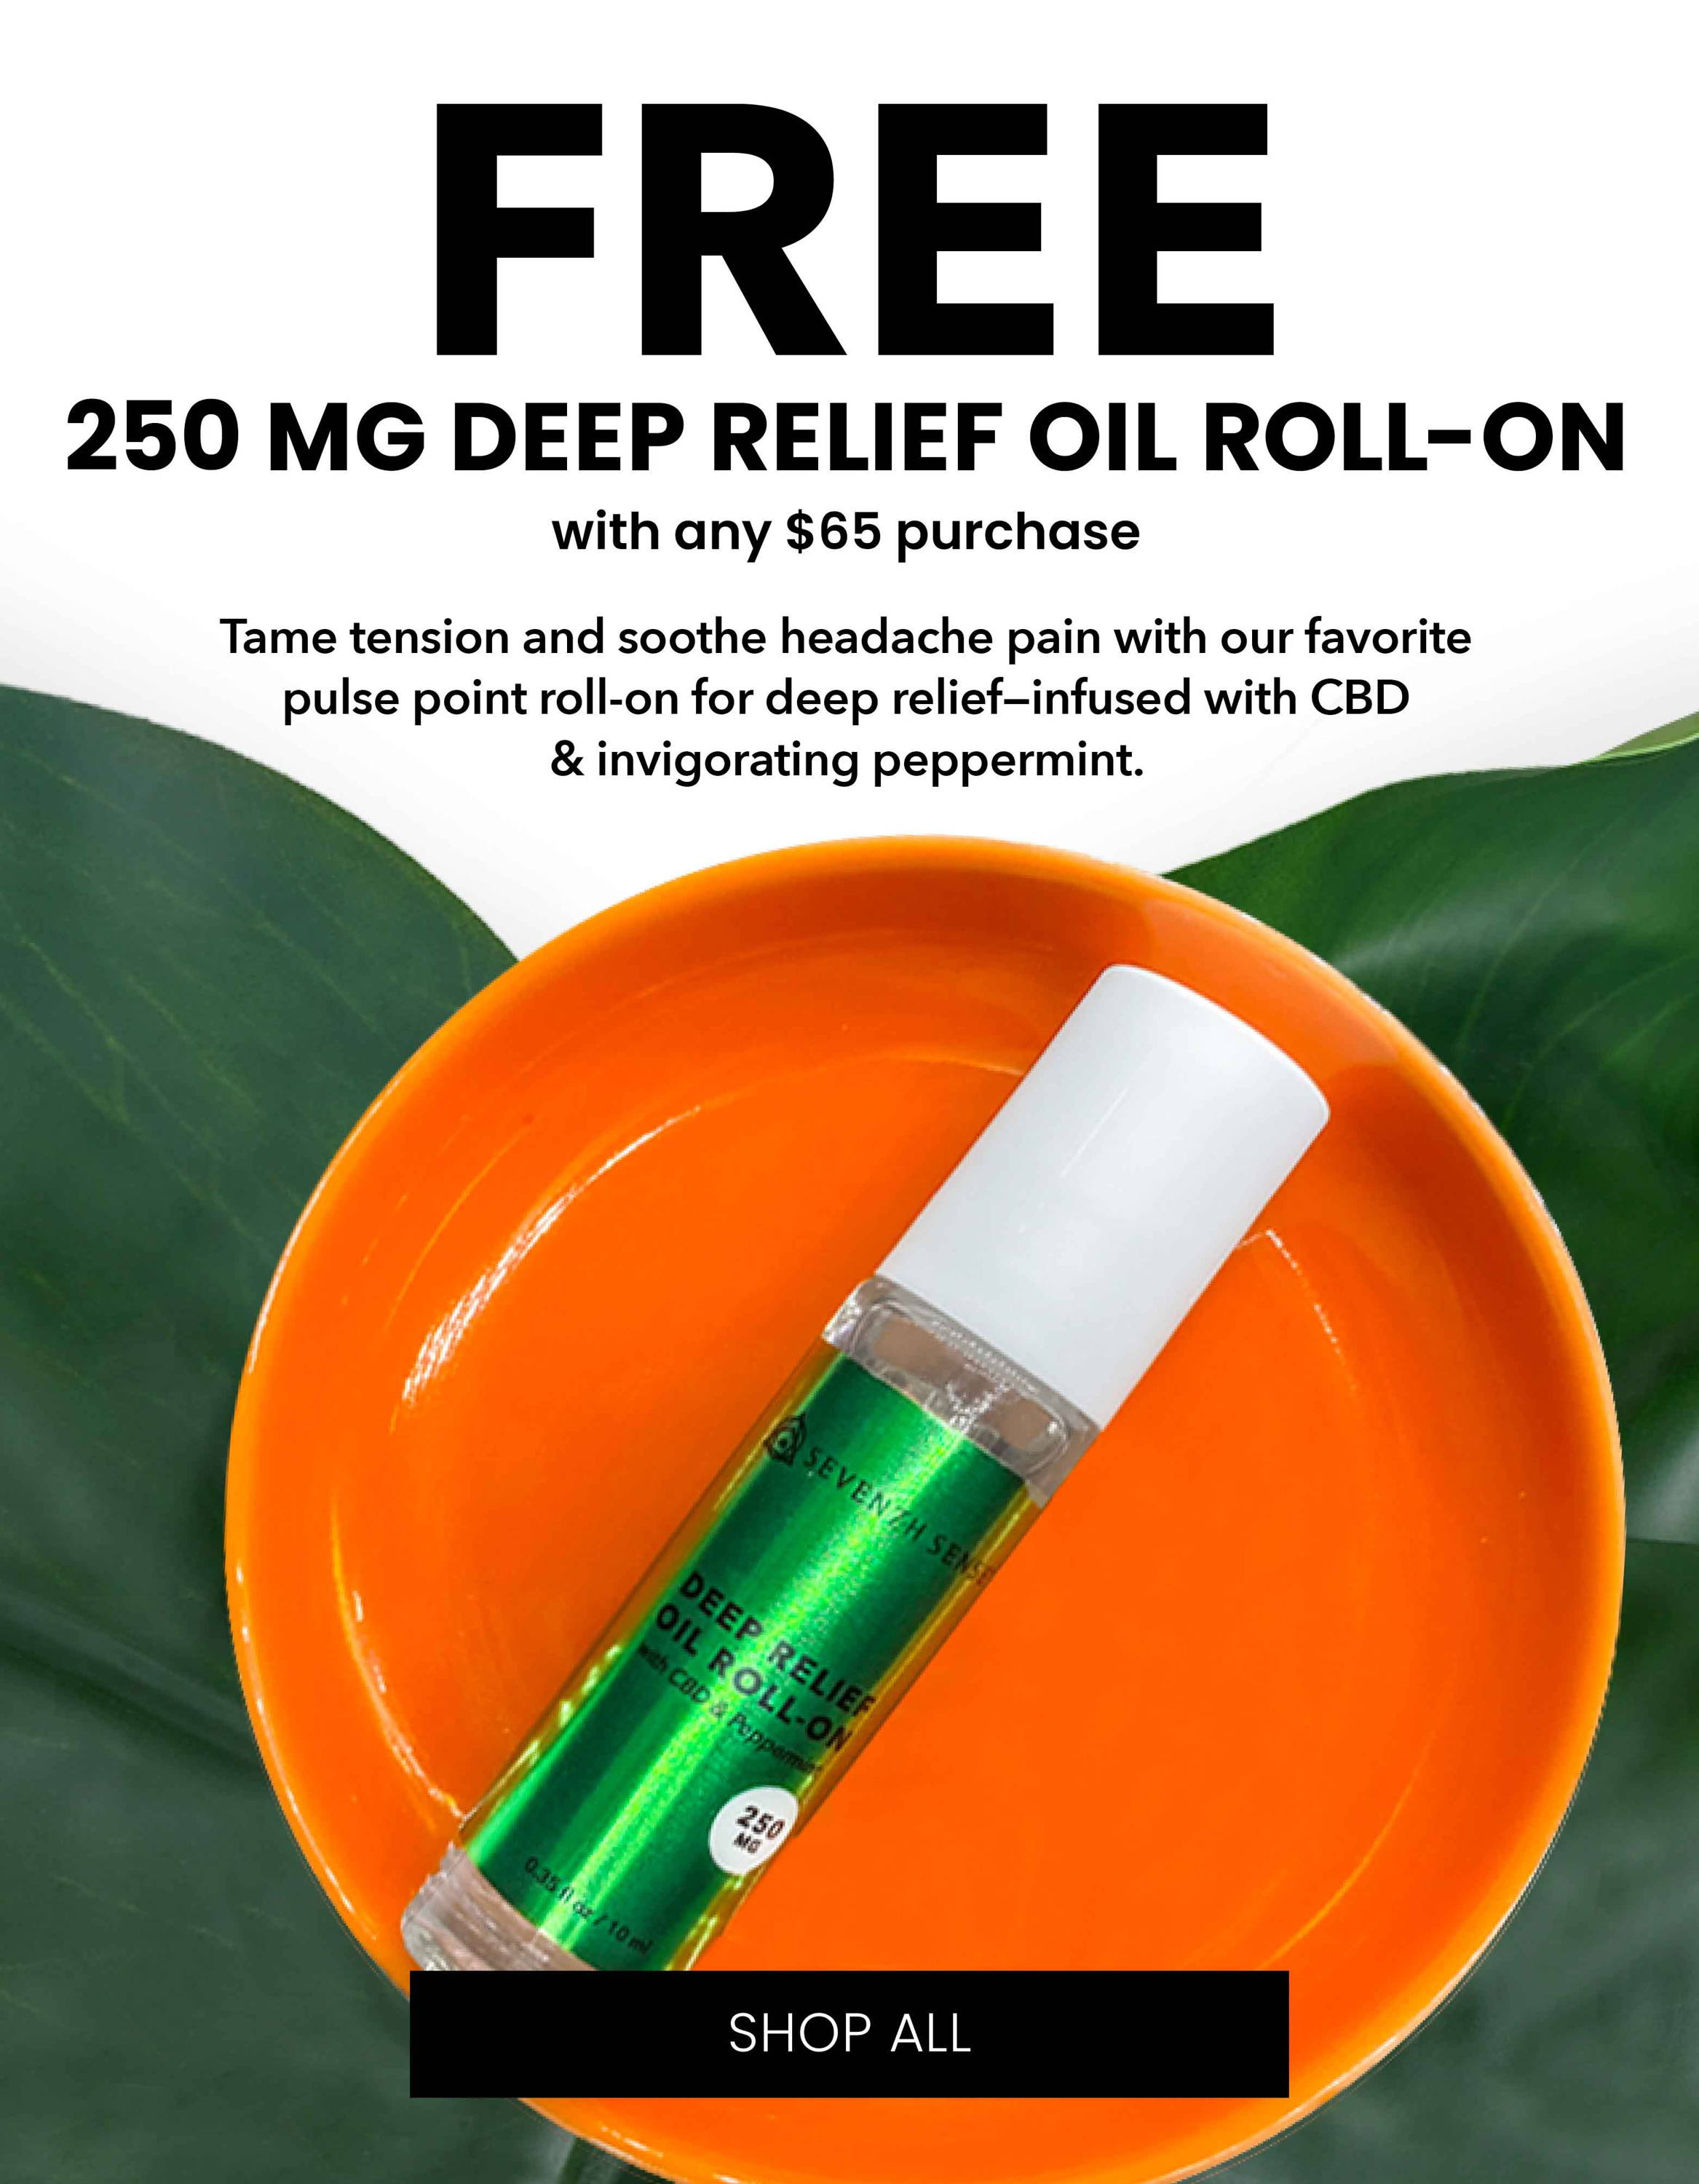 Free 250mg Deep Relief Oil Roll-on with any $65 purchase.